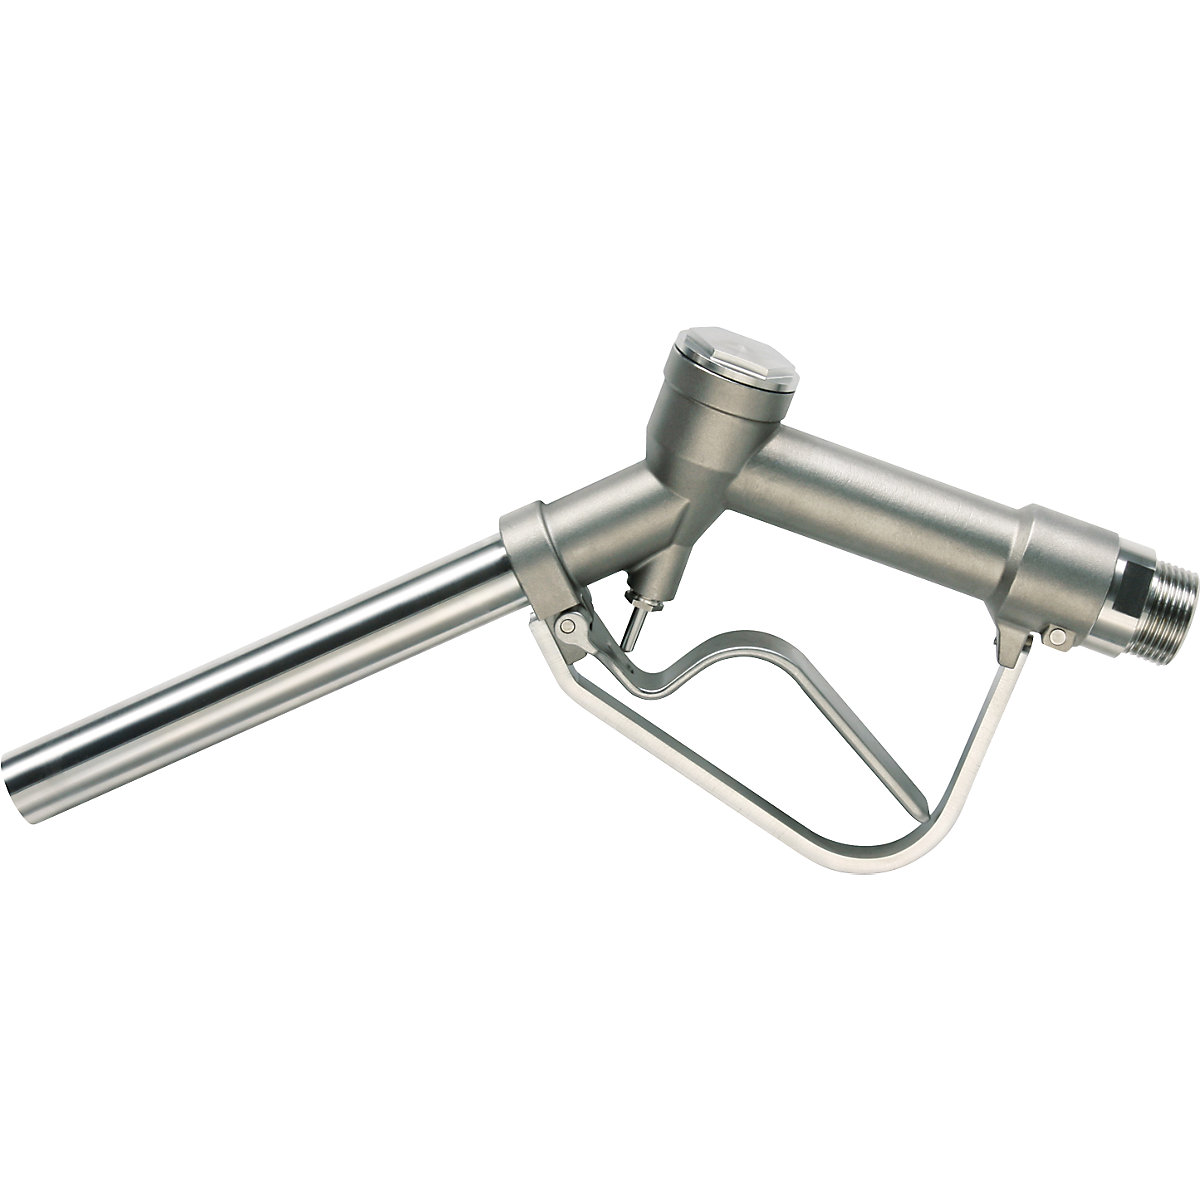 Manual pump pistol made of stainless steel 1.4571 - Jessberger